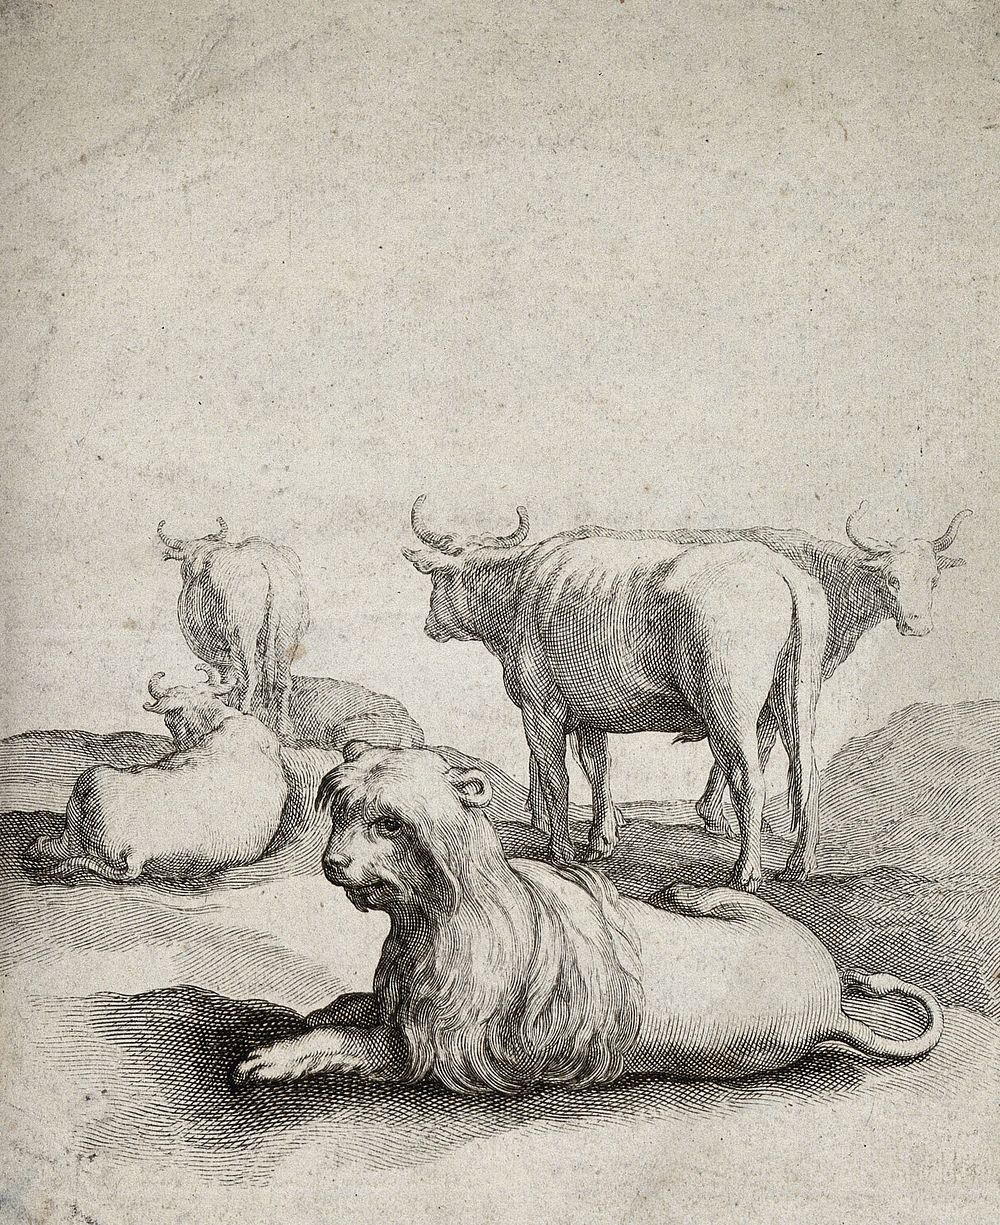 A feline creature is lying in front of a herd of cattle. Engraving.